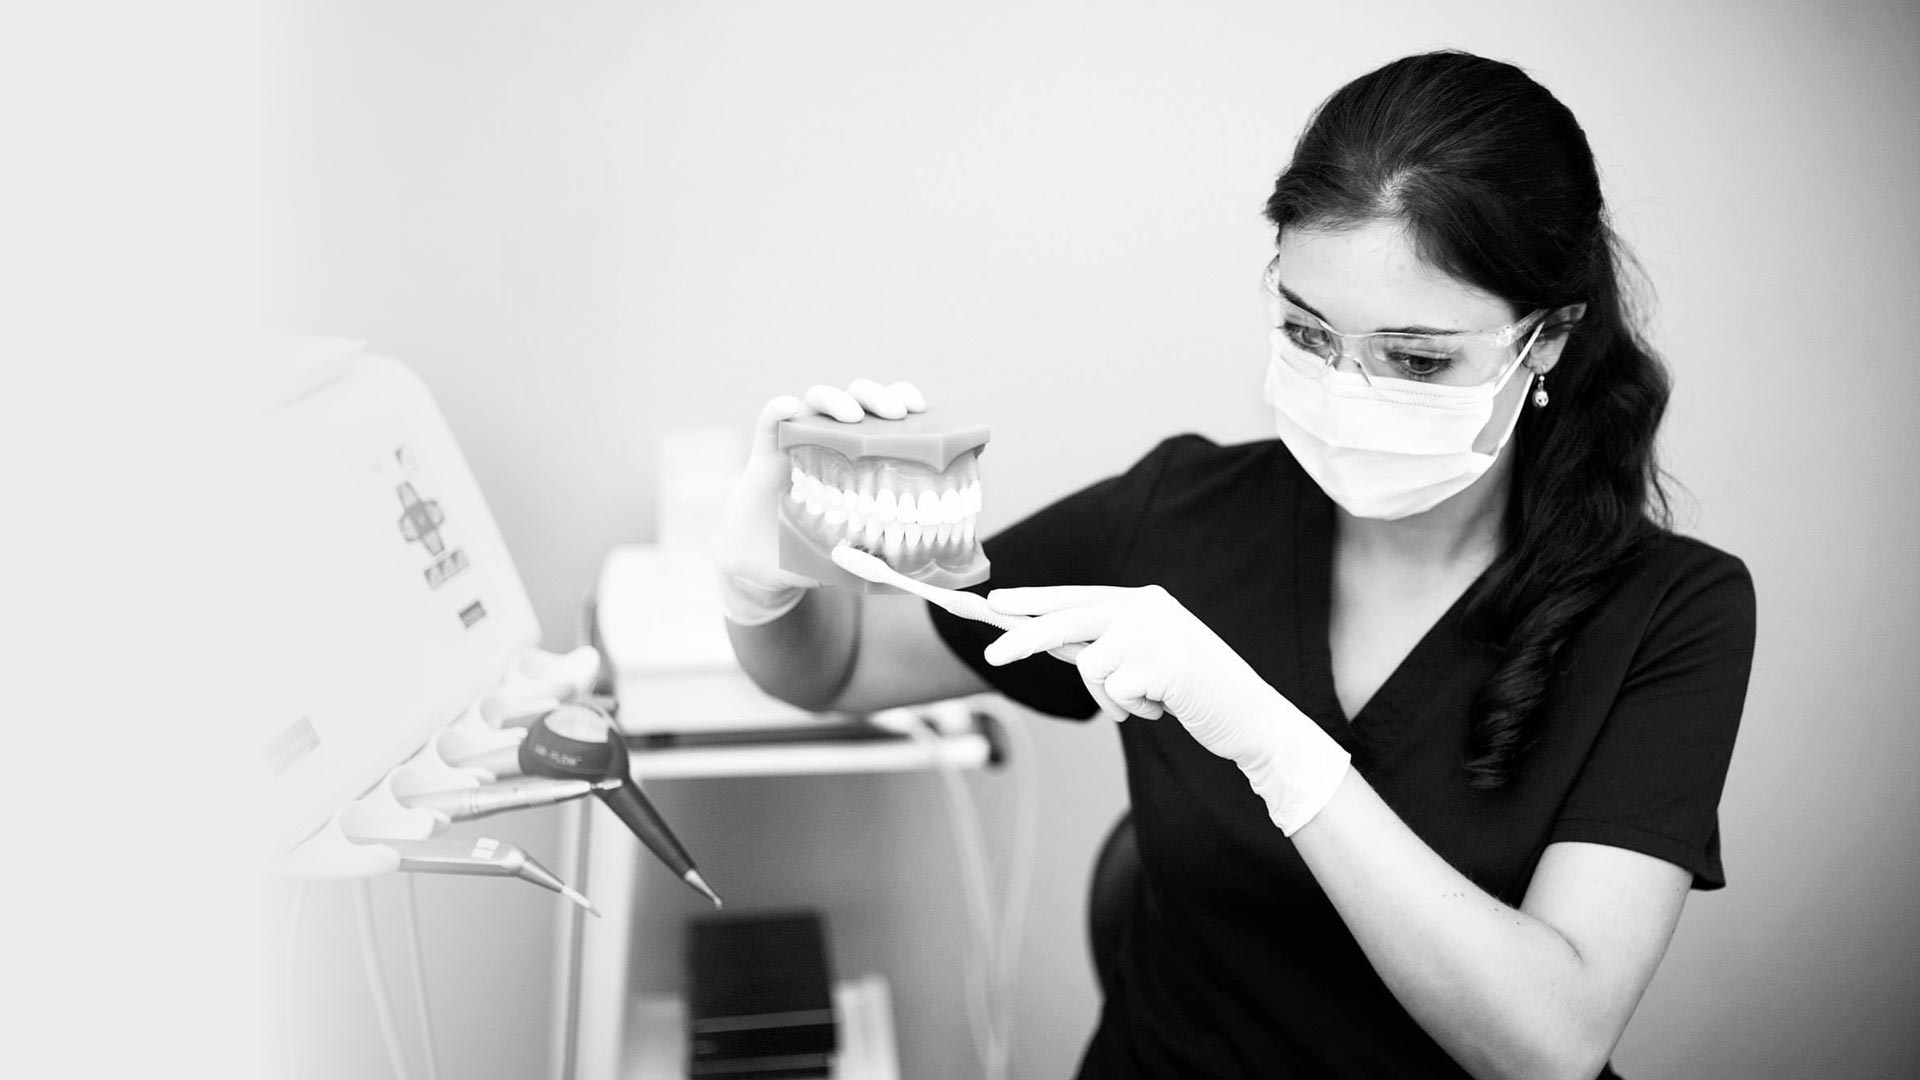 A dentist holds up a model of teeth and shows how to brush them using a toothbrush.